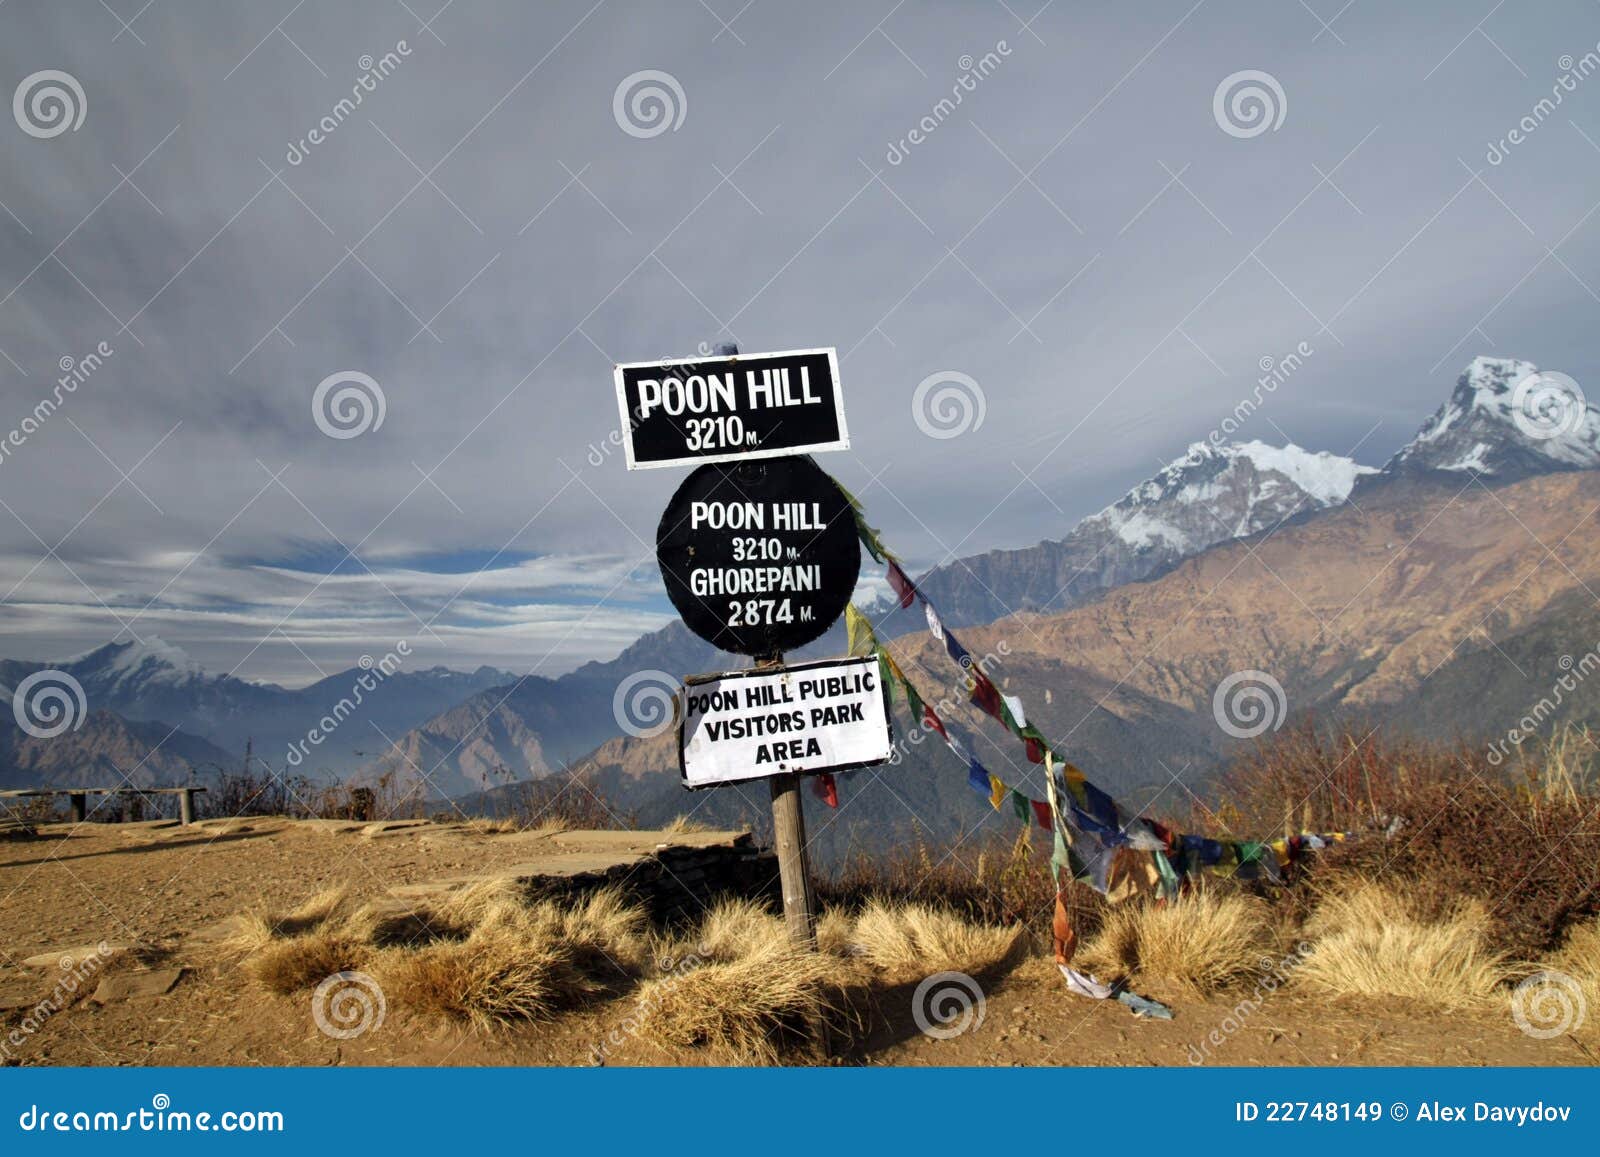 poon hill view point